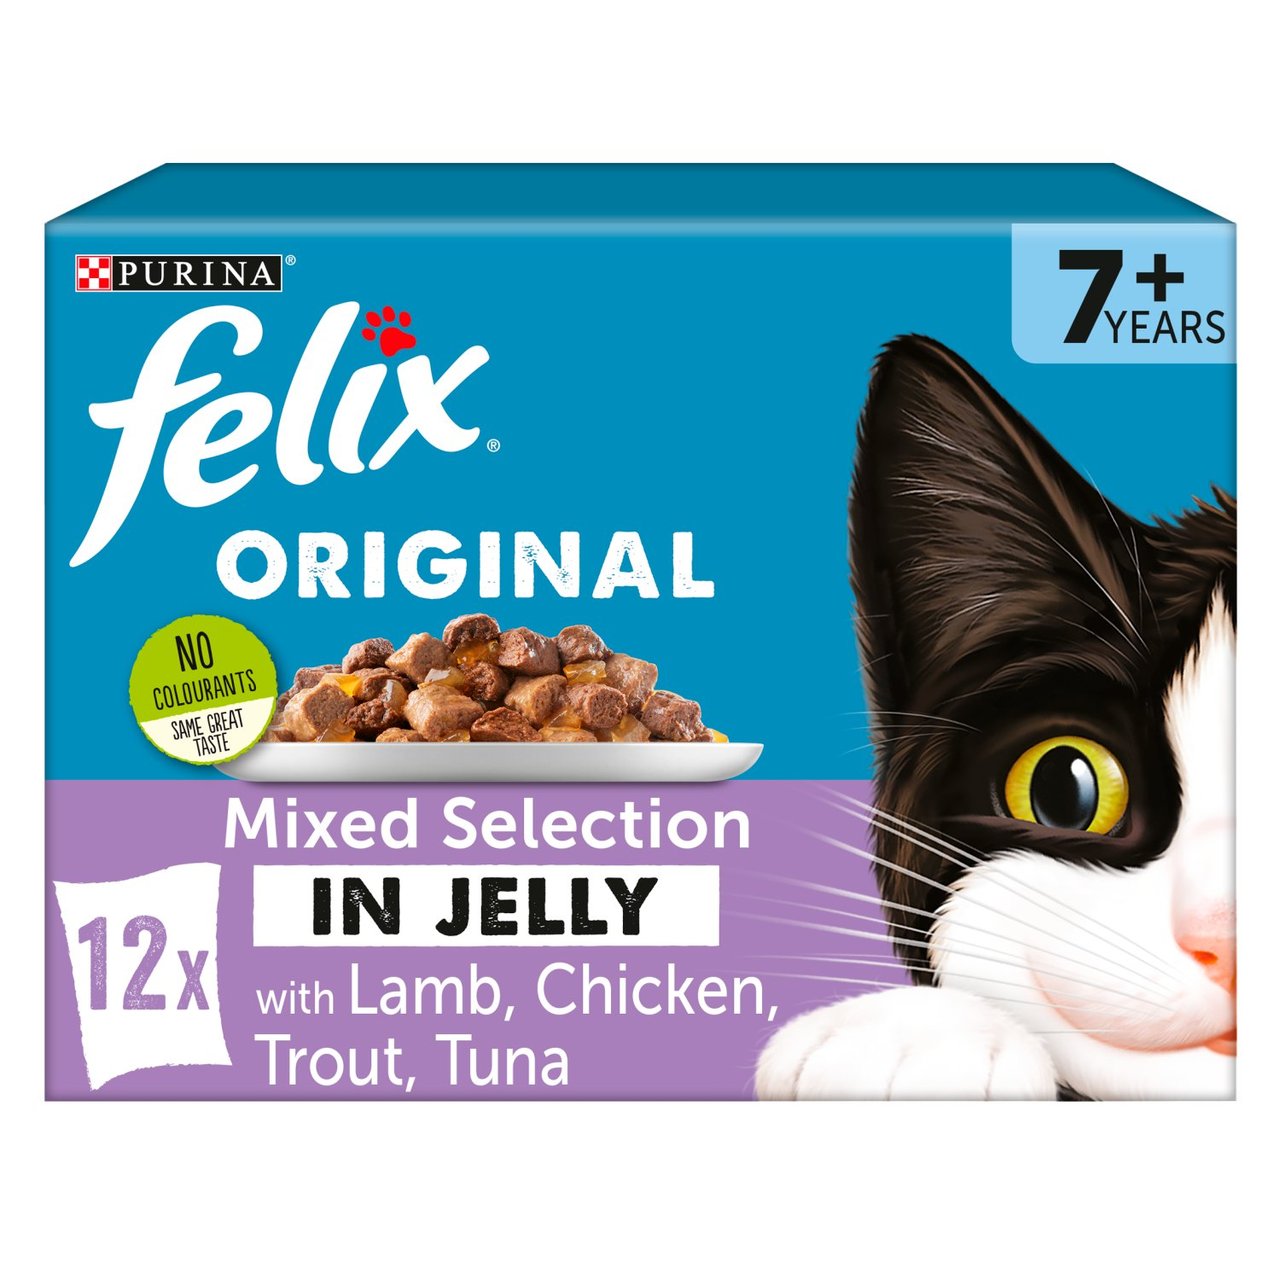 An image of Felix 7+ Mixed Selection in Jelly